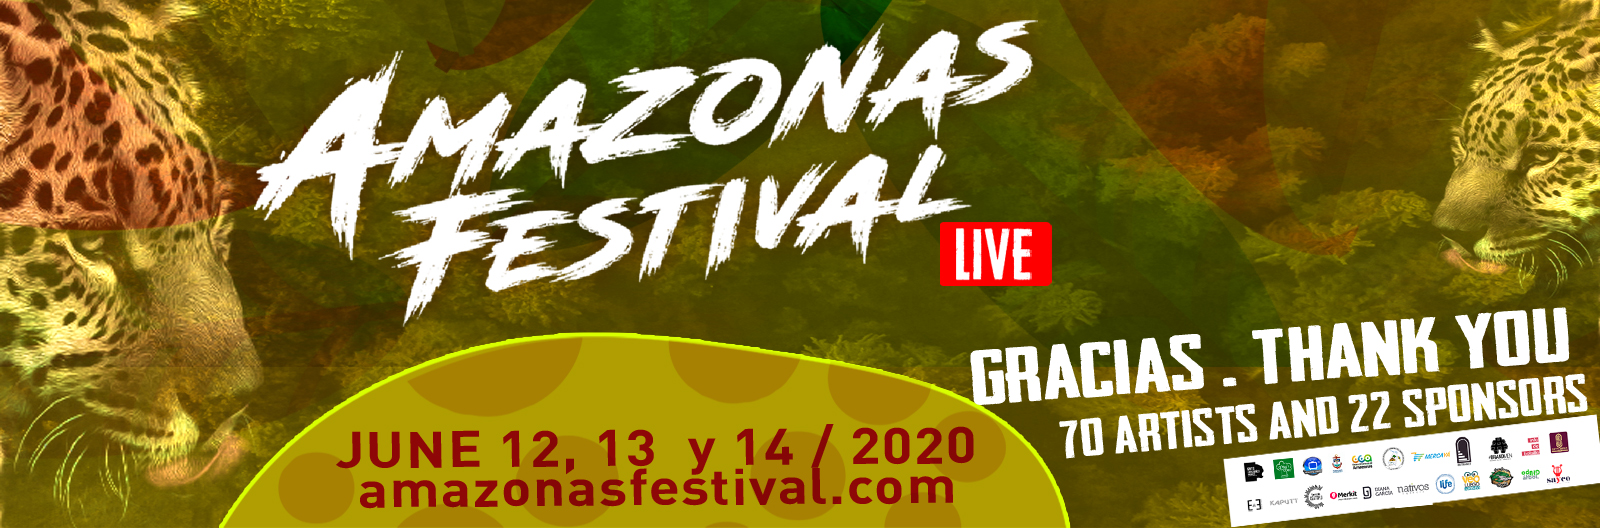 AMAZONAS FESTIVAL 2020, FIRST STREAMING LIVE CONCERT IN COLOMBIA.